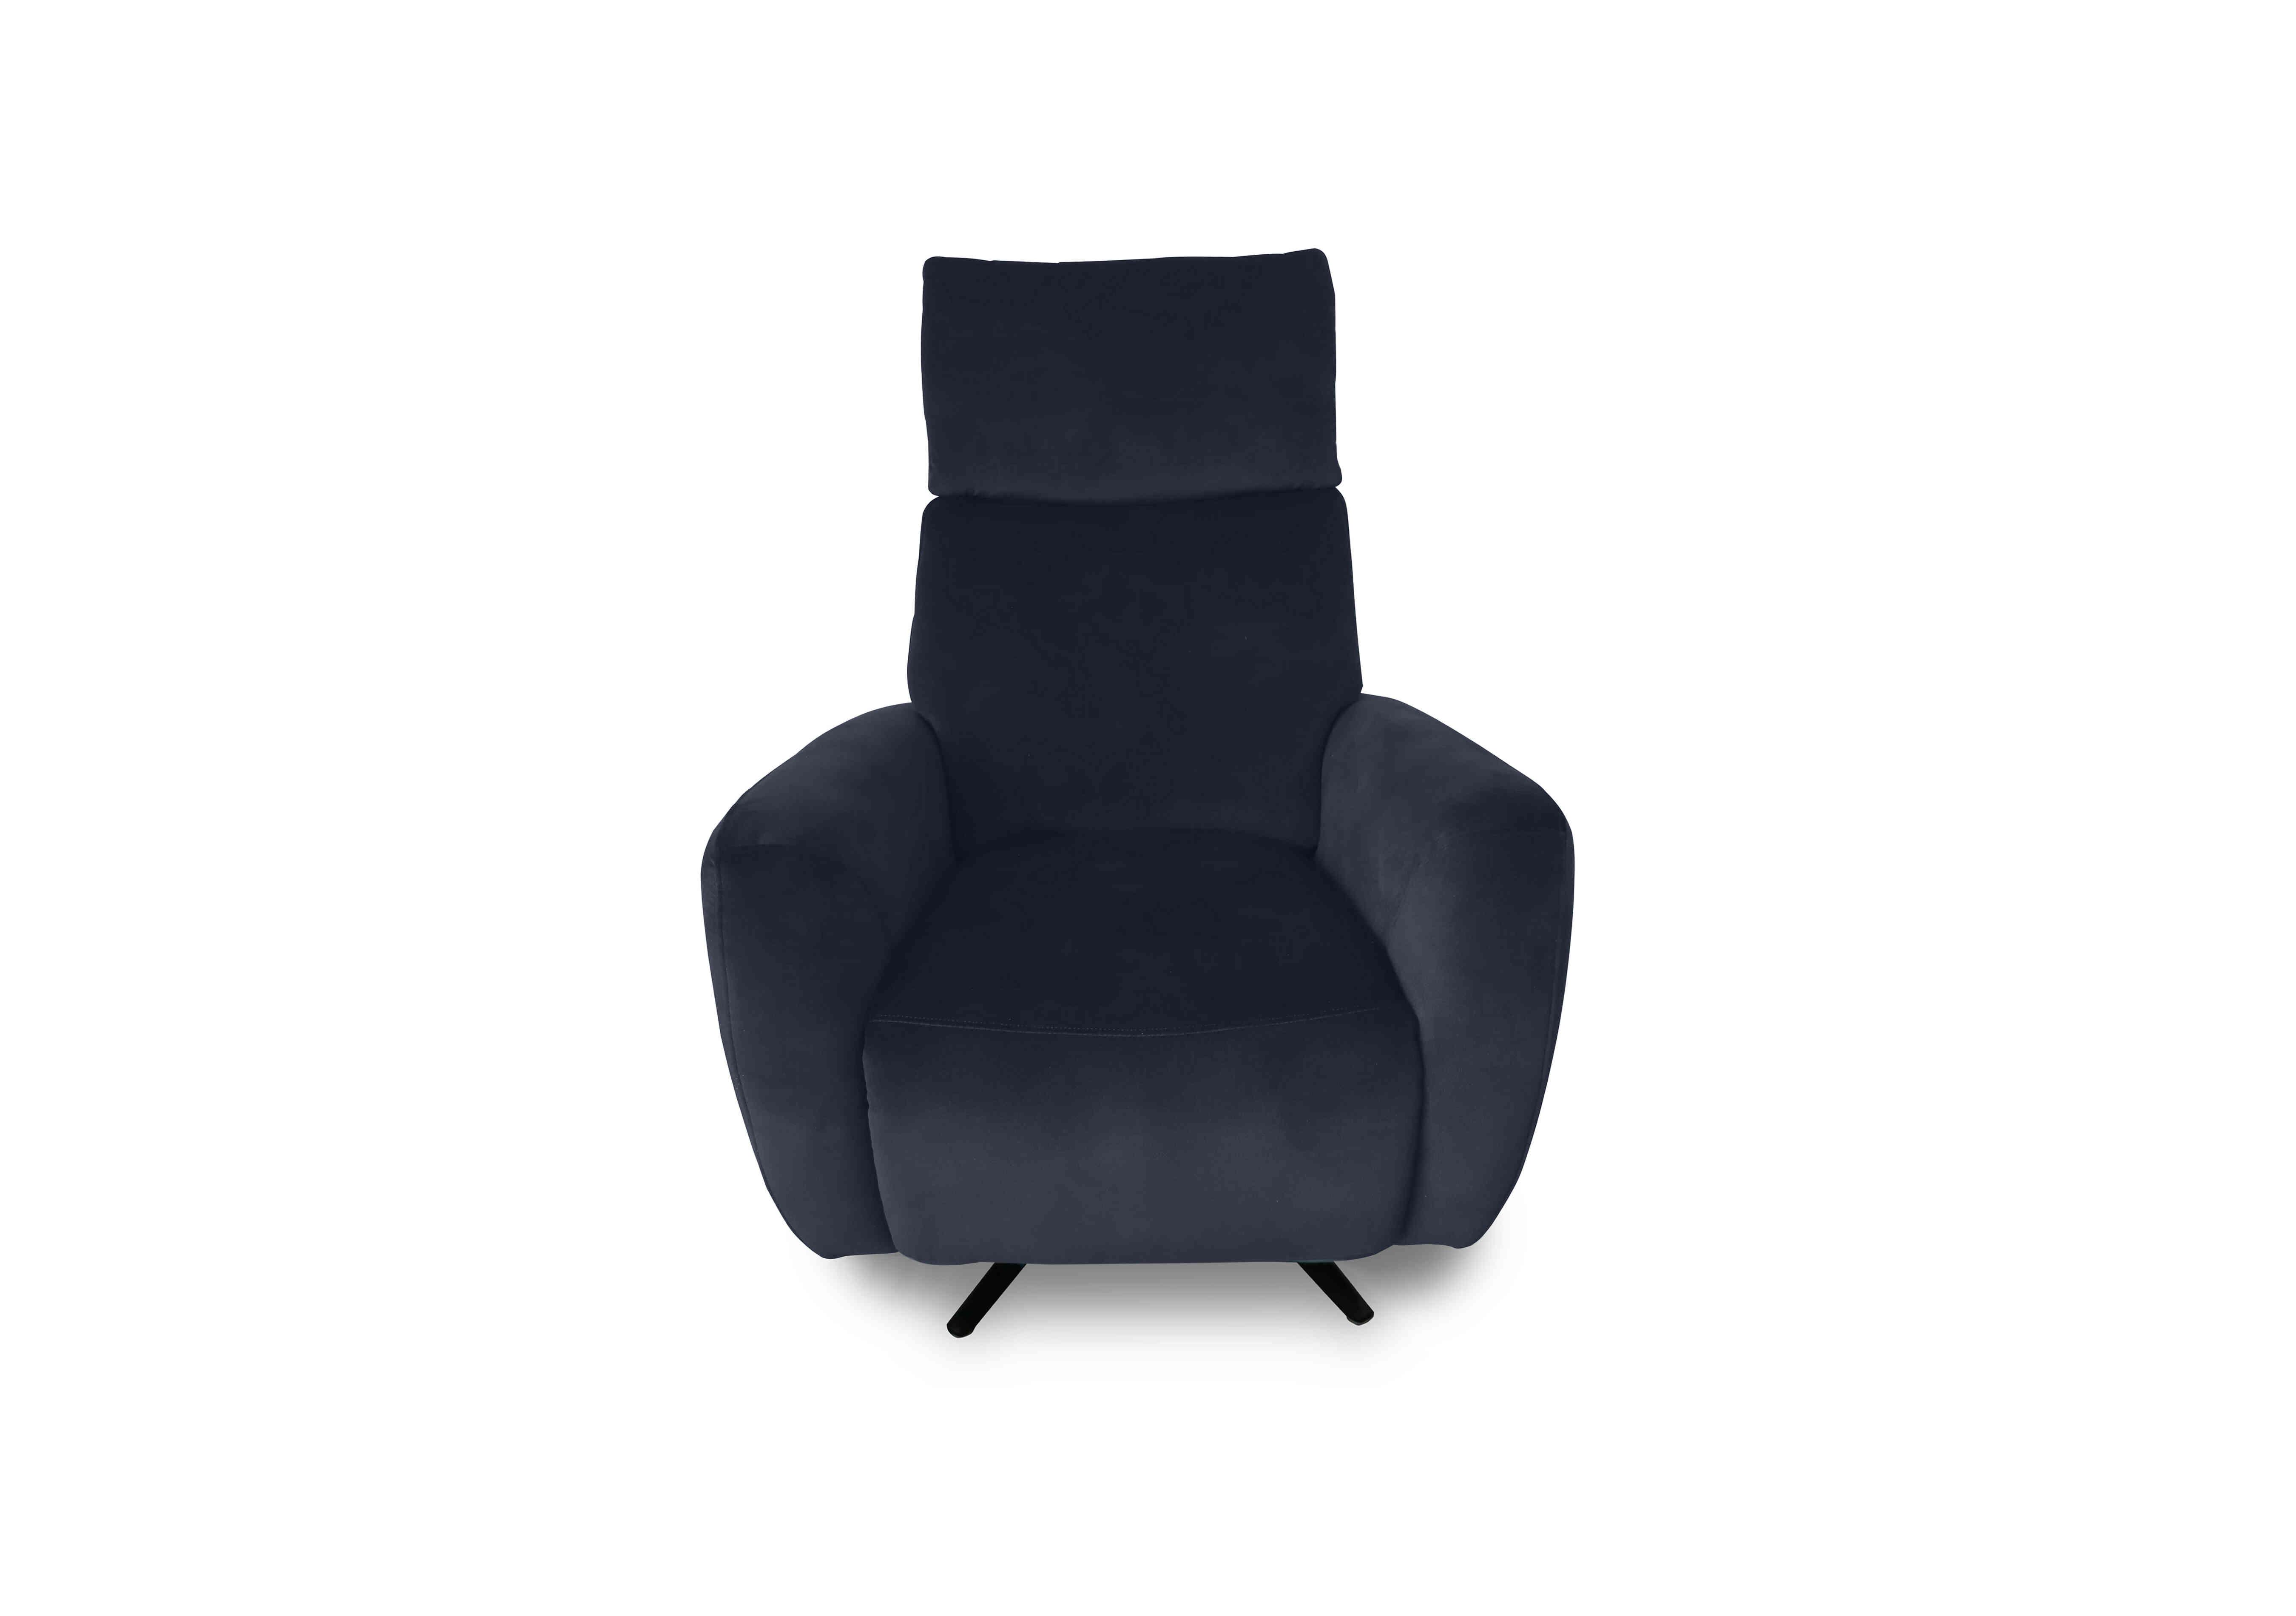 Designer Chair Collection Granada Fabric Power Recliner Swivel Chair with Massage Feature in Sfa-Pey-R15 Navy Blue on Furniture Village